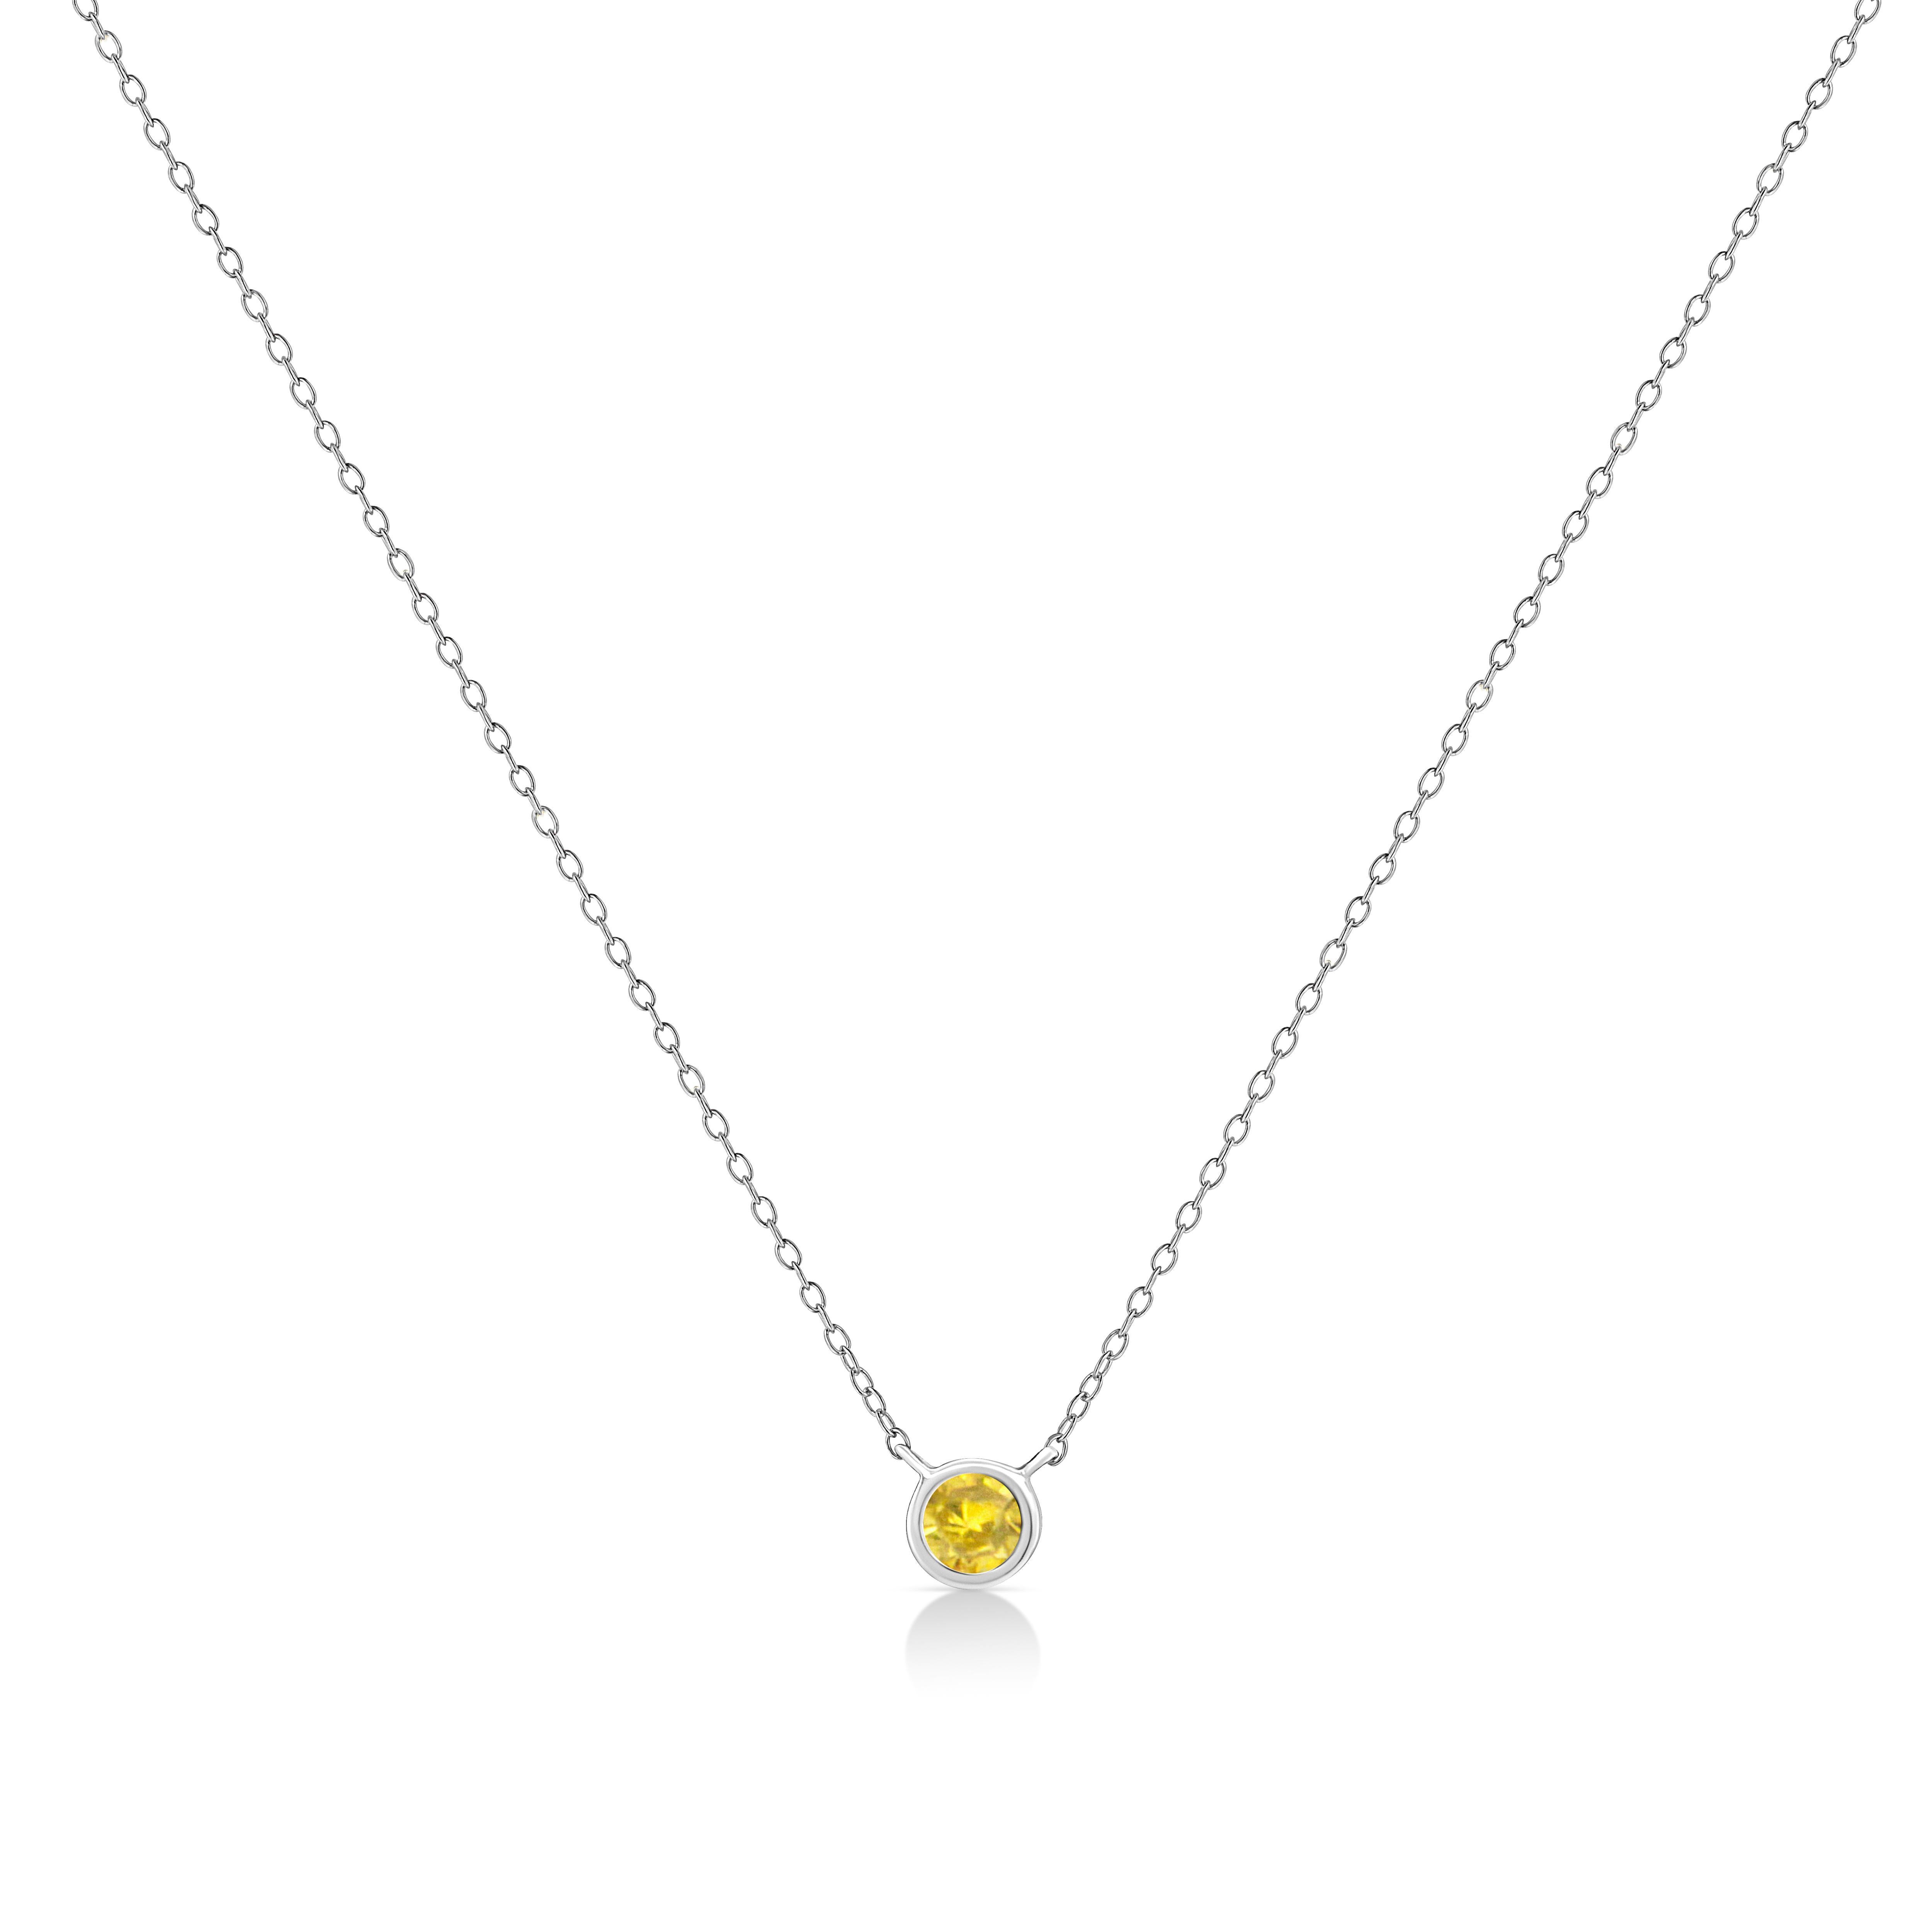 Some things shouldn't be reinvented, which is why we created the Solitaire Yellow Diamond Necklace. This is the perfect way to highlight every big occasion, transition, and personal achievement in your life. This Solitaire Diamond Necklace features